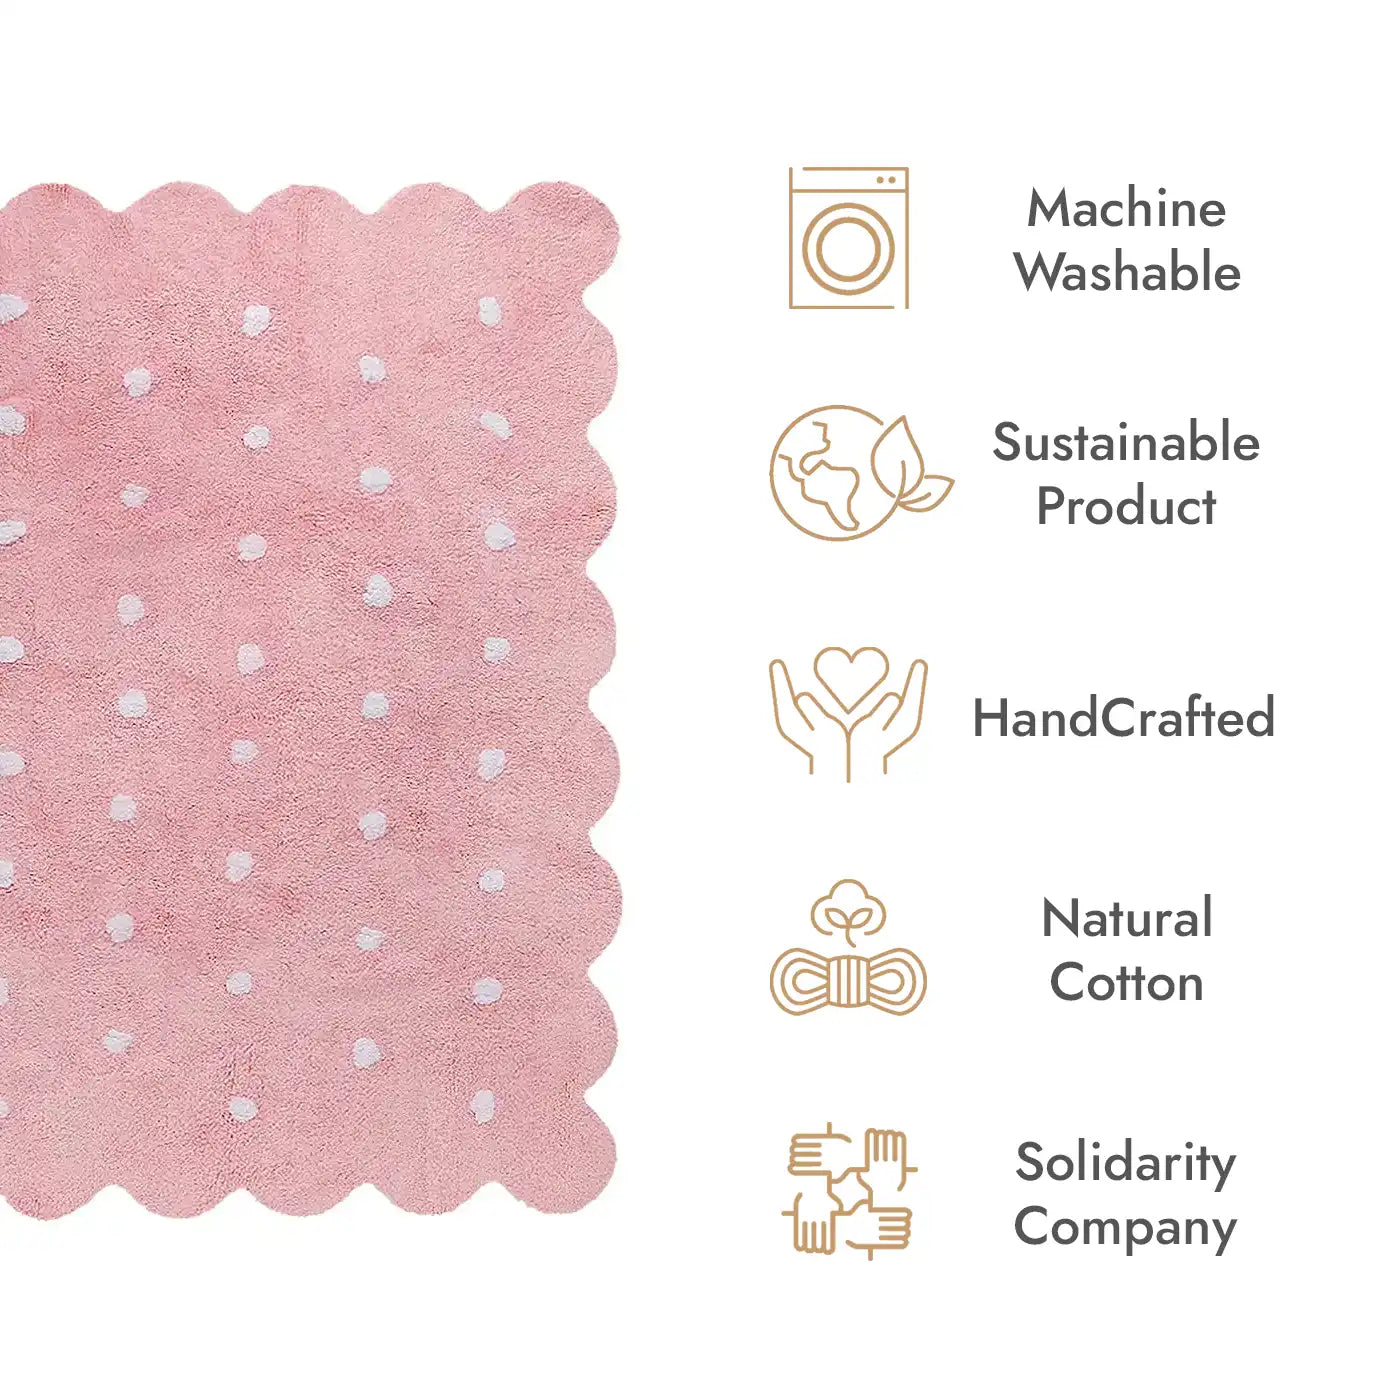 Lorena Canals Biscuit Washable Rug - Pink (Biscuit Collection)